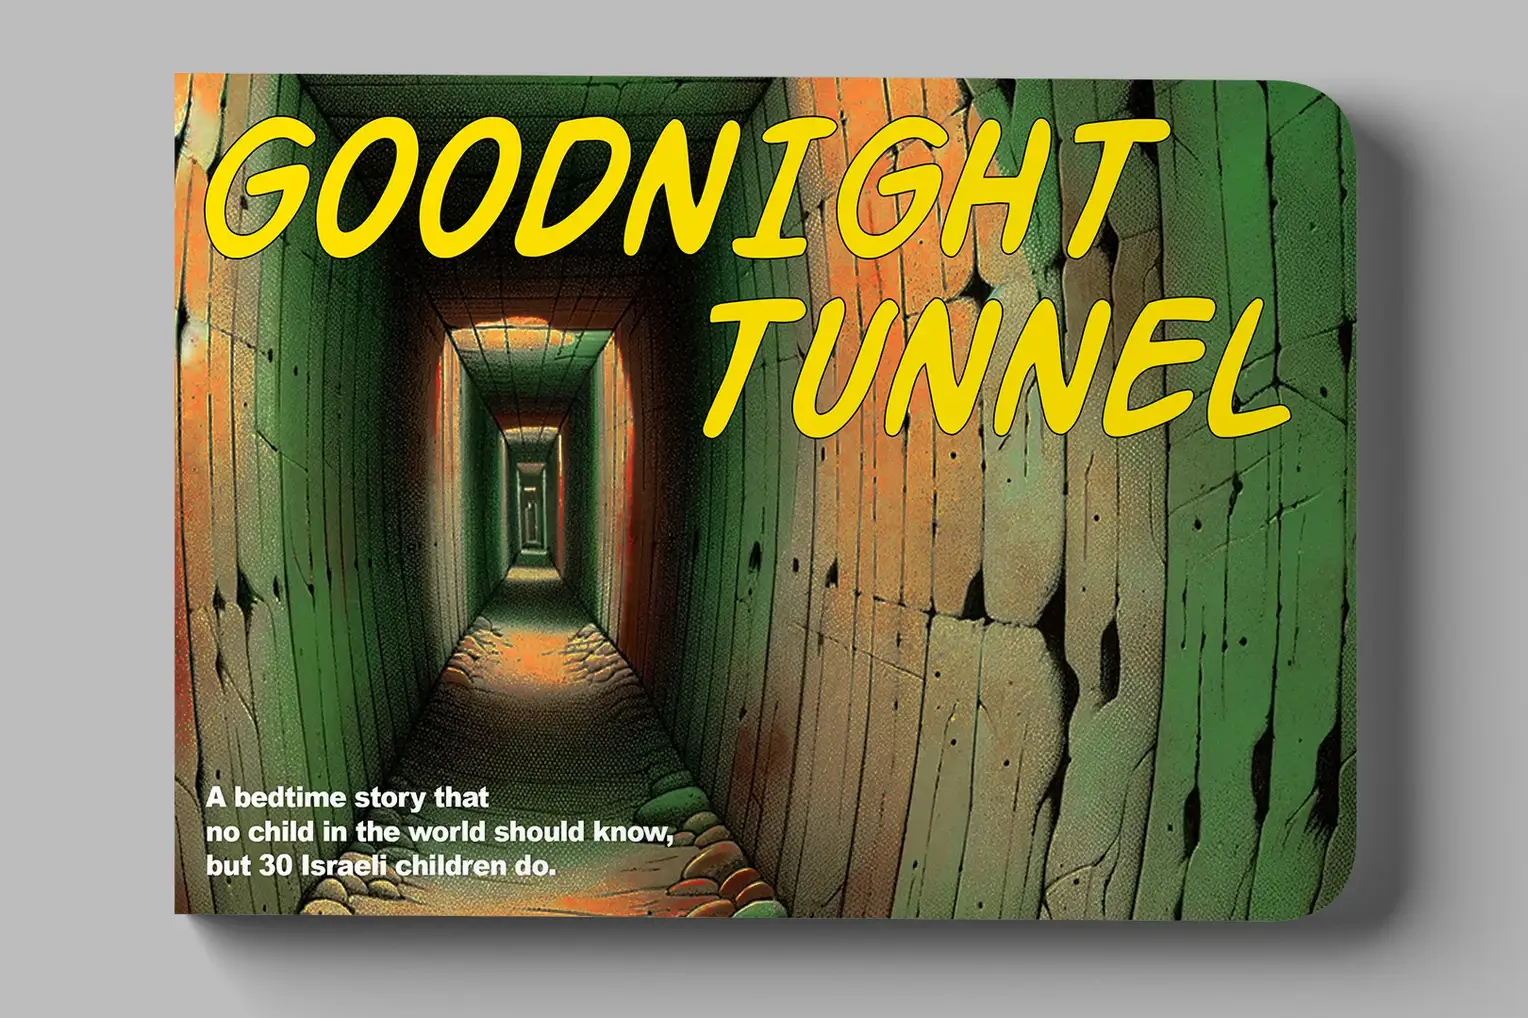 <i>Goodnight Tunnel</i> reimagines the children's classic <i>Goodnight Moon</i> with bedtime terrors for the children kidnapped by Hamas.